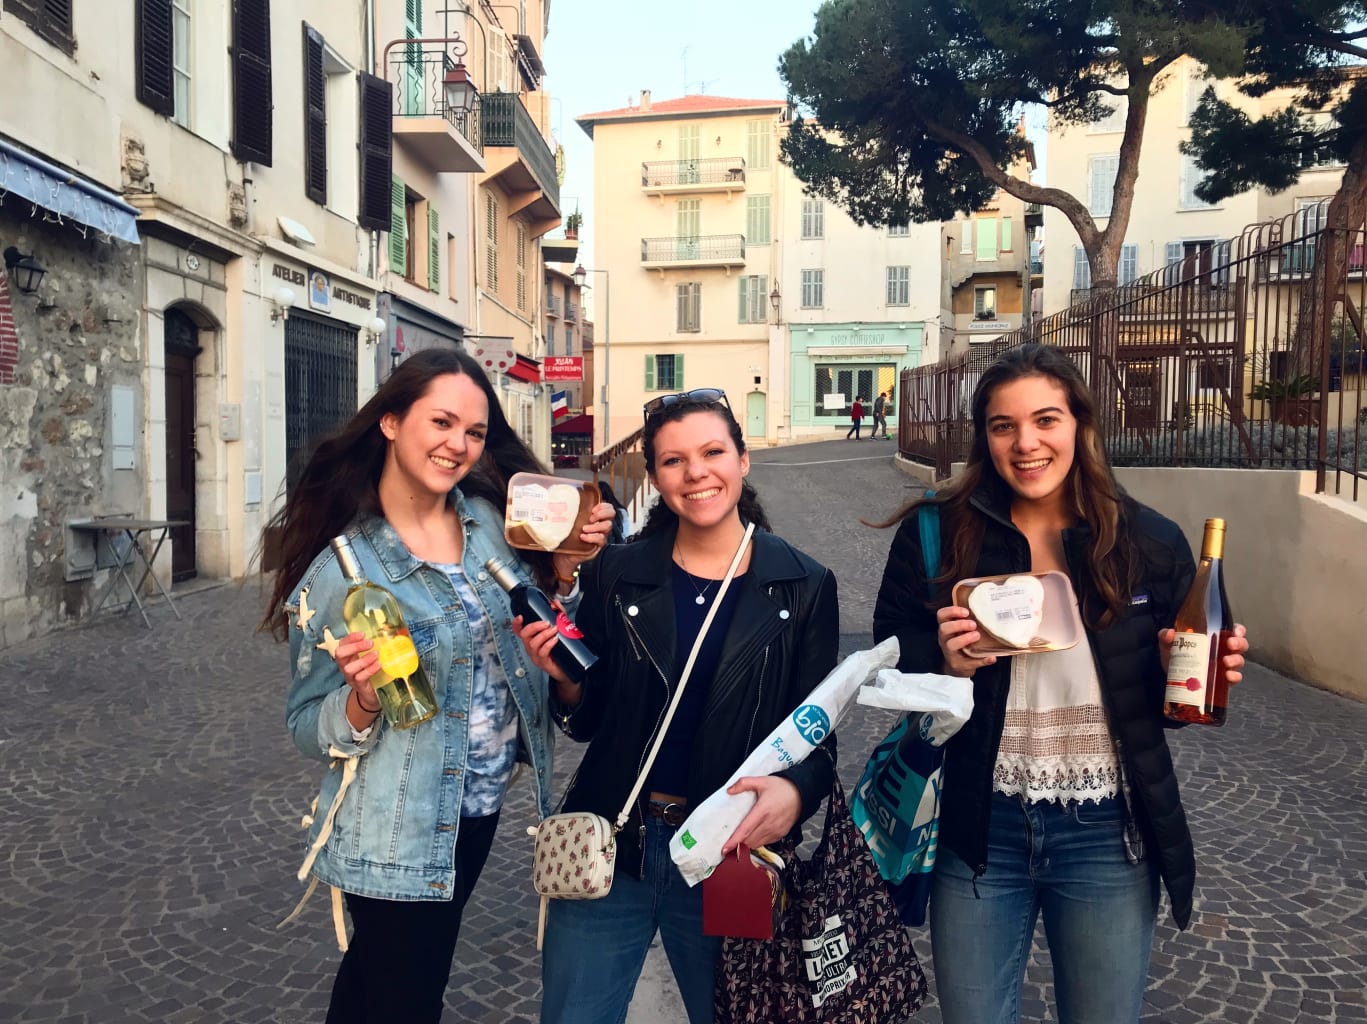 Three girls smiling holding cups.